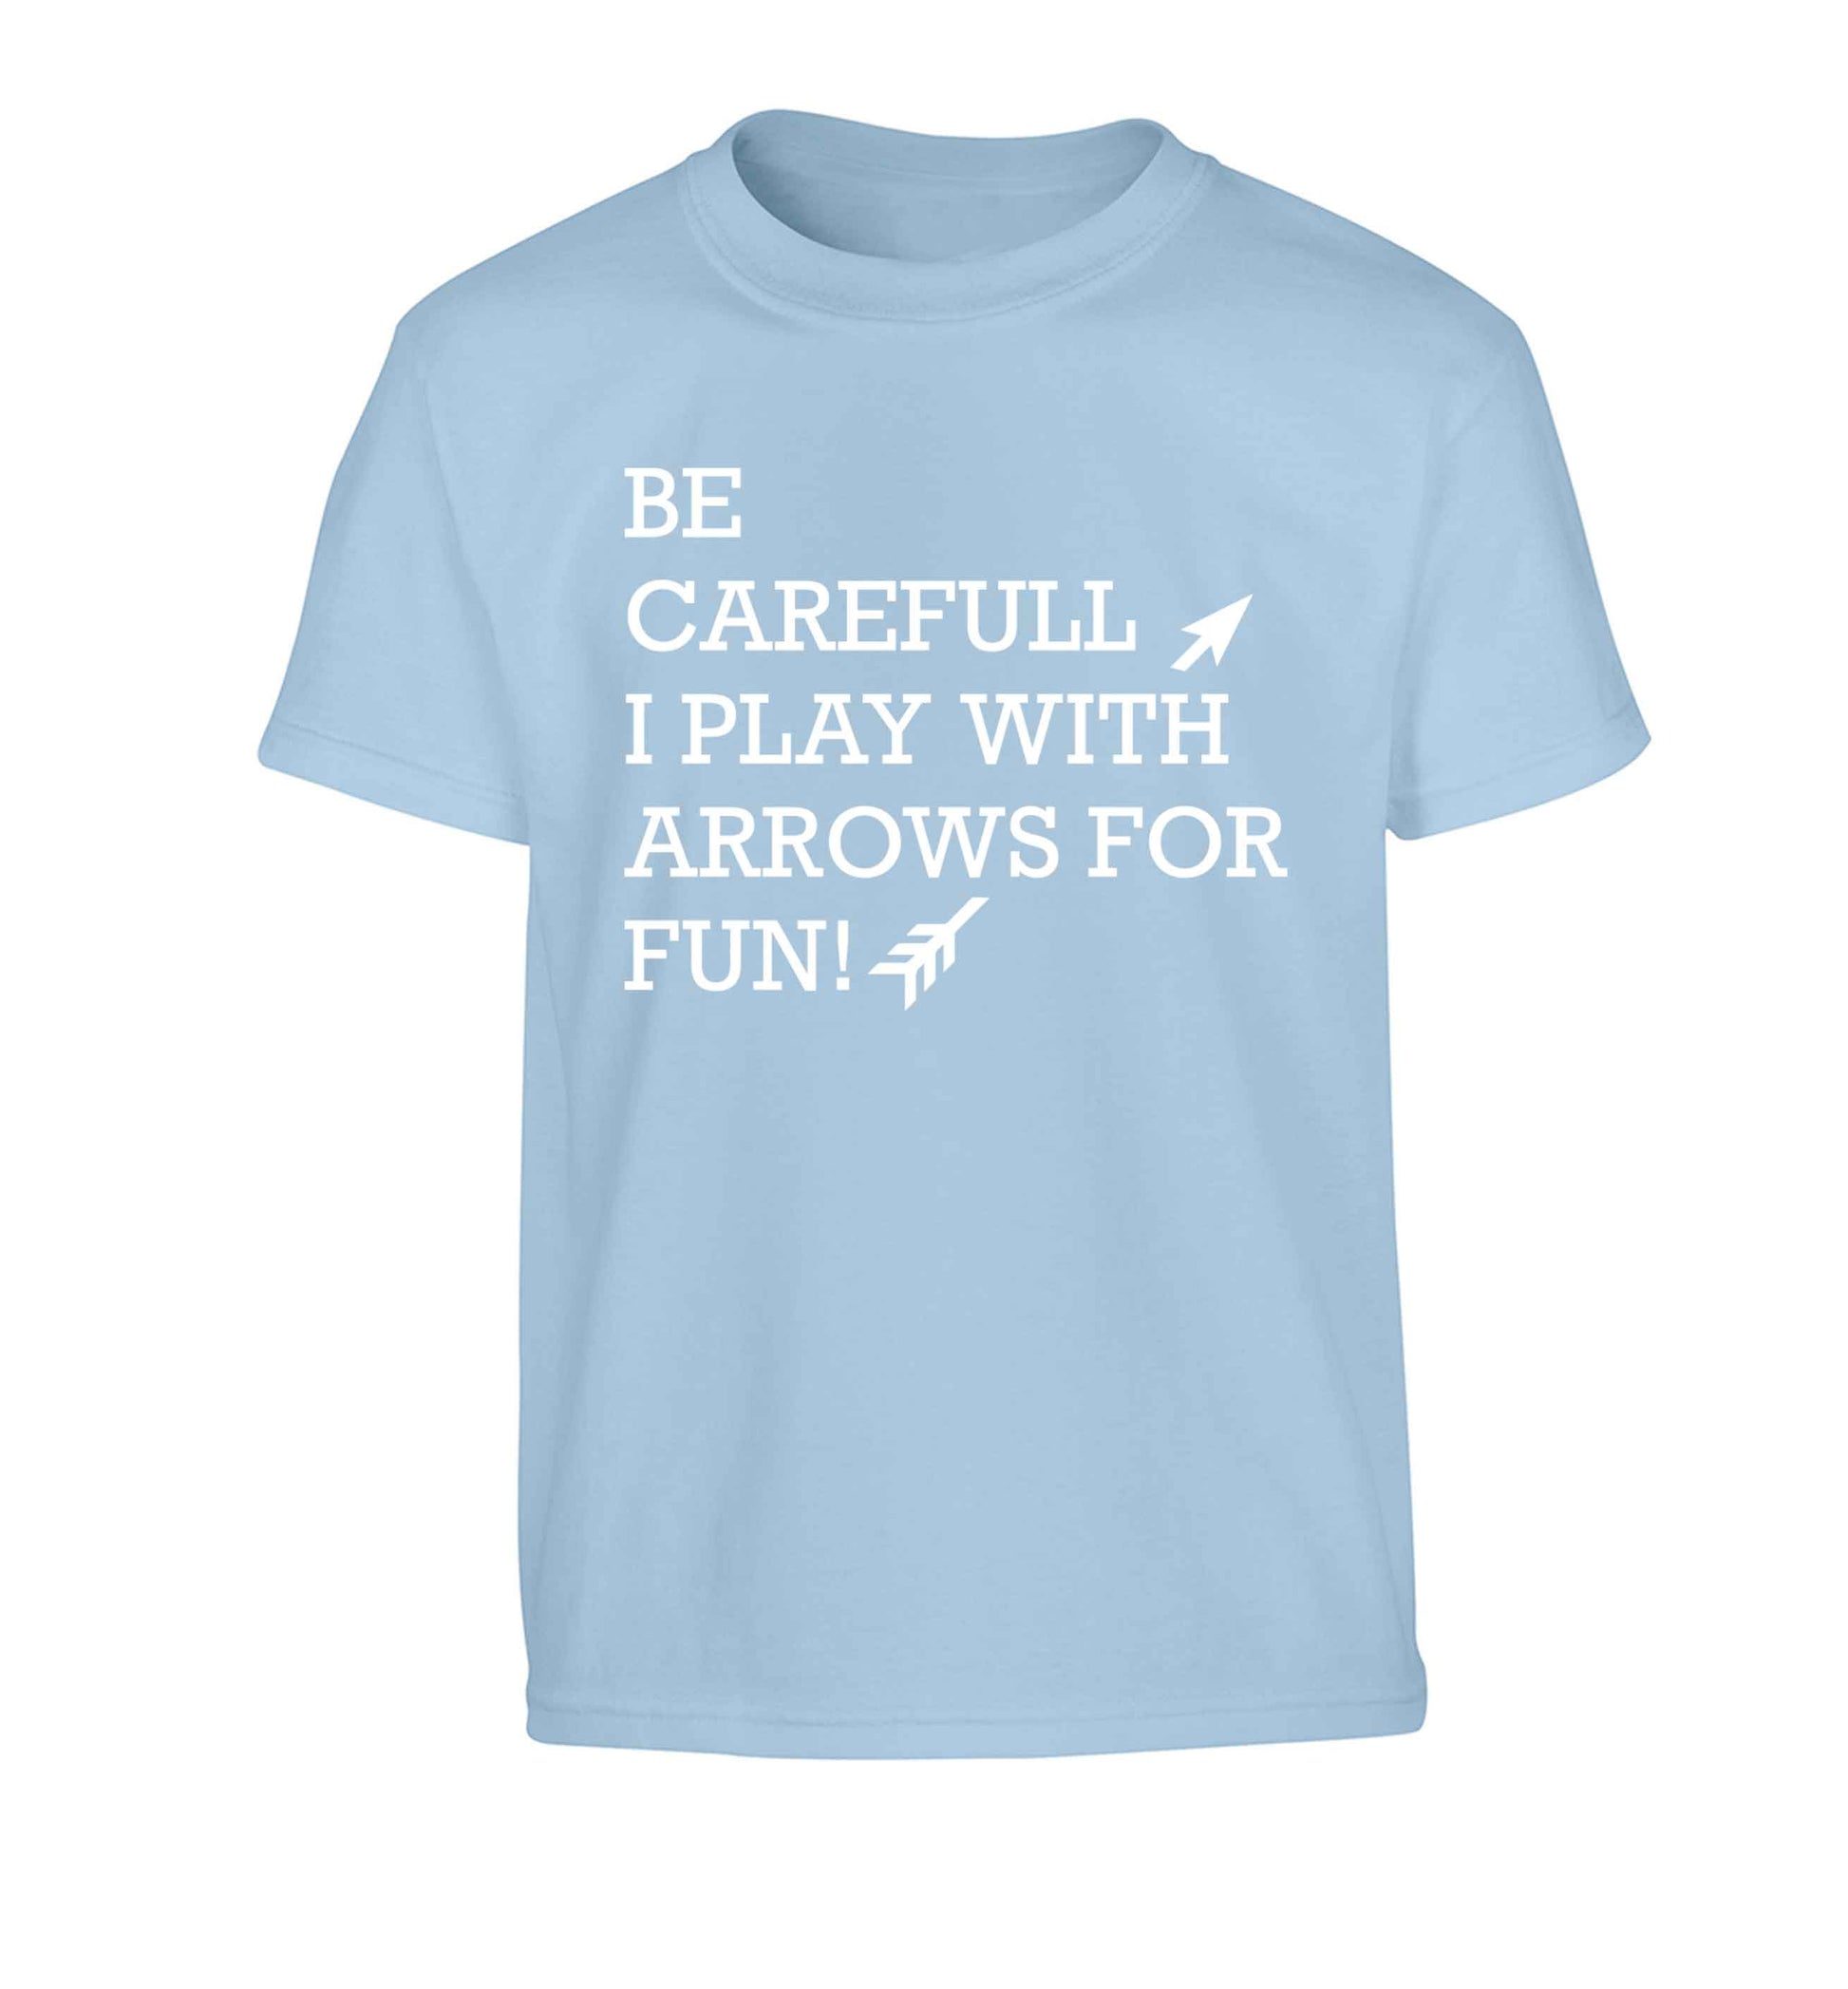 Be carefull I play with arrows for fun Children's light blue Tshirt 12-13 Years